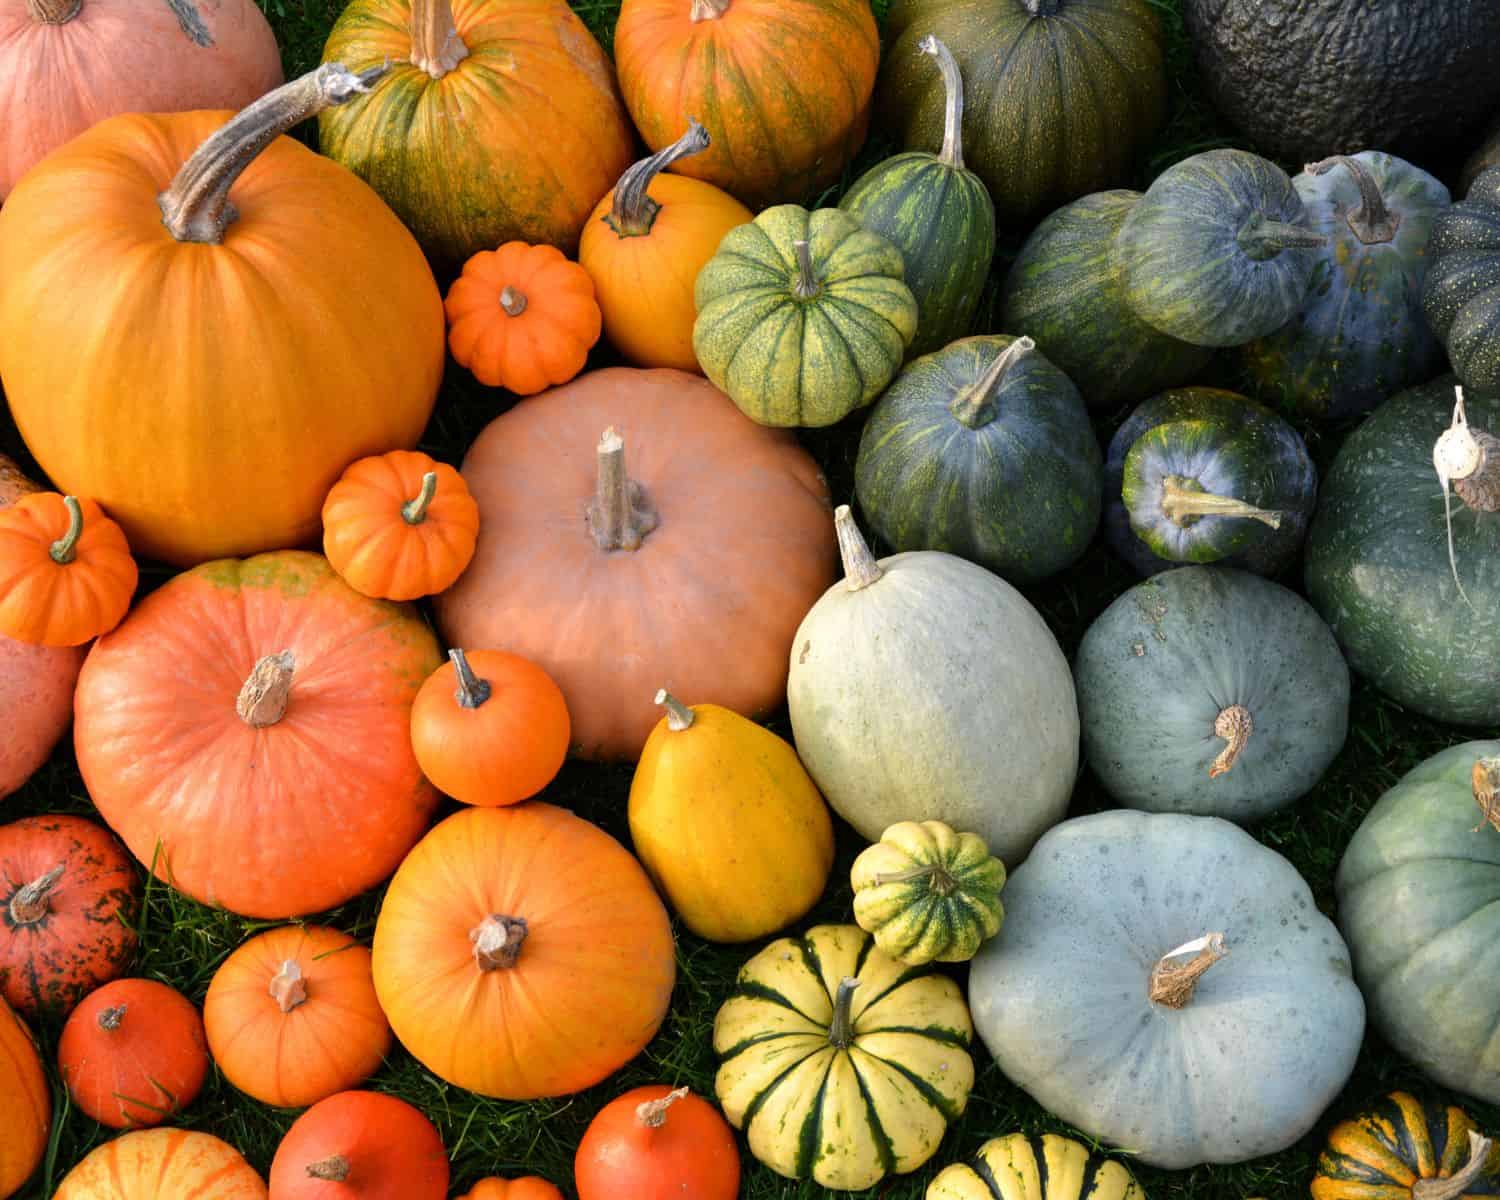 A variety of pumpkins are in a photo, taking up the whole frame, ranging in color from green to orange.